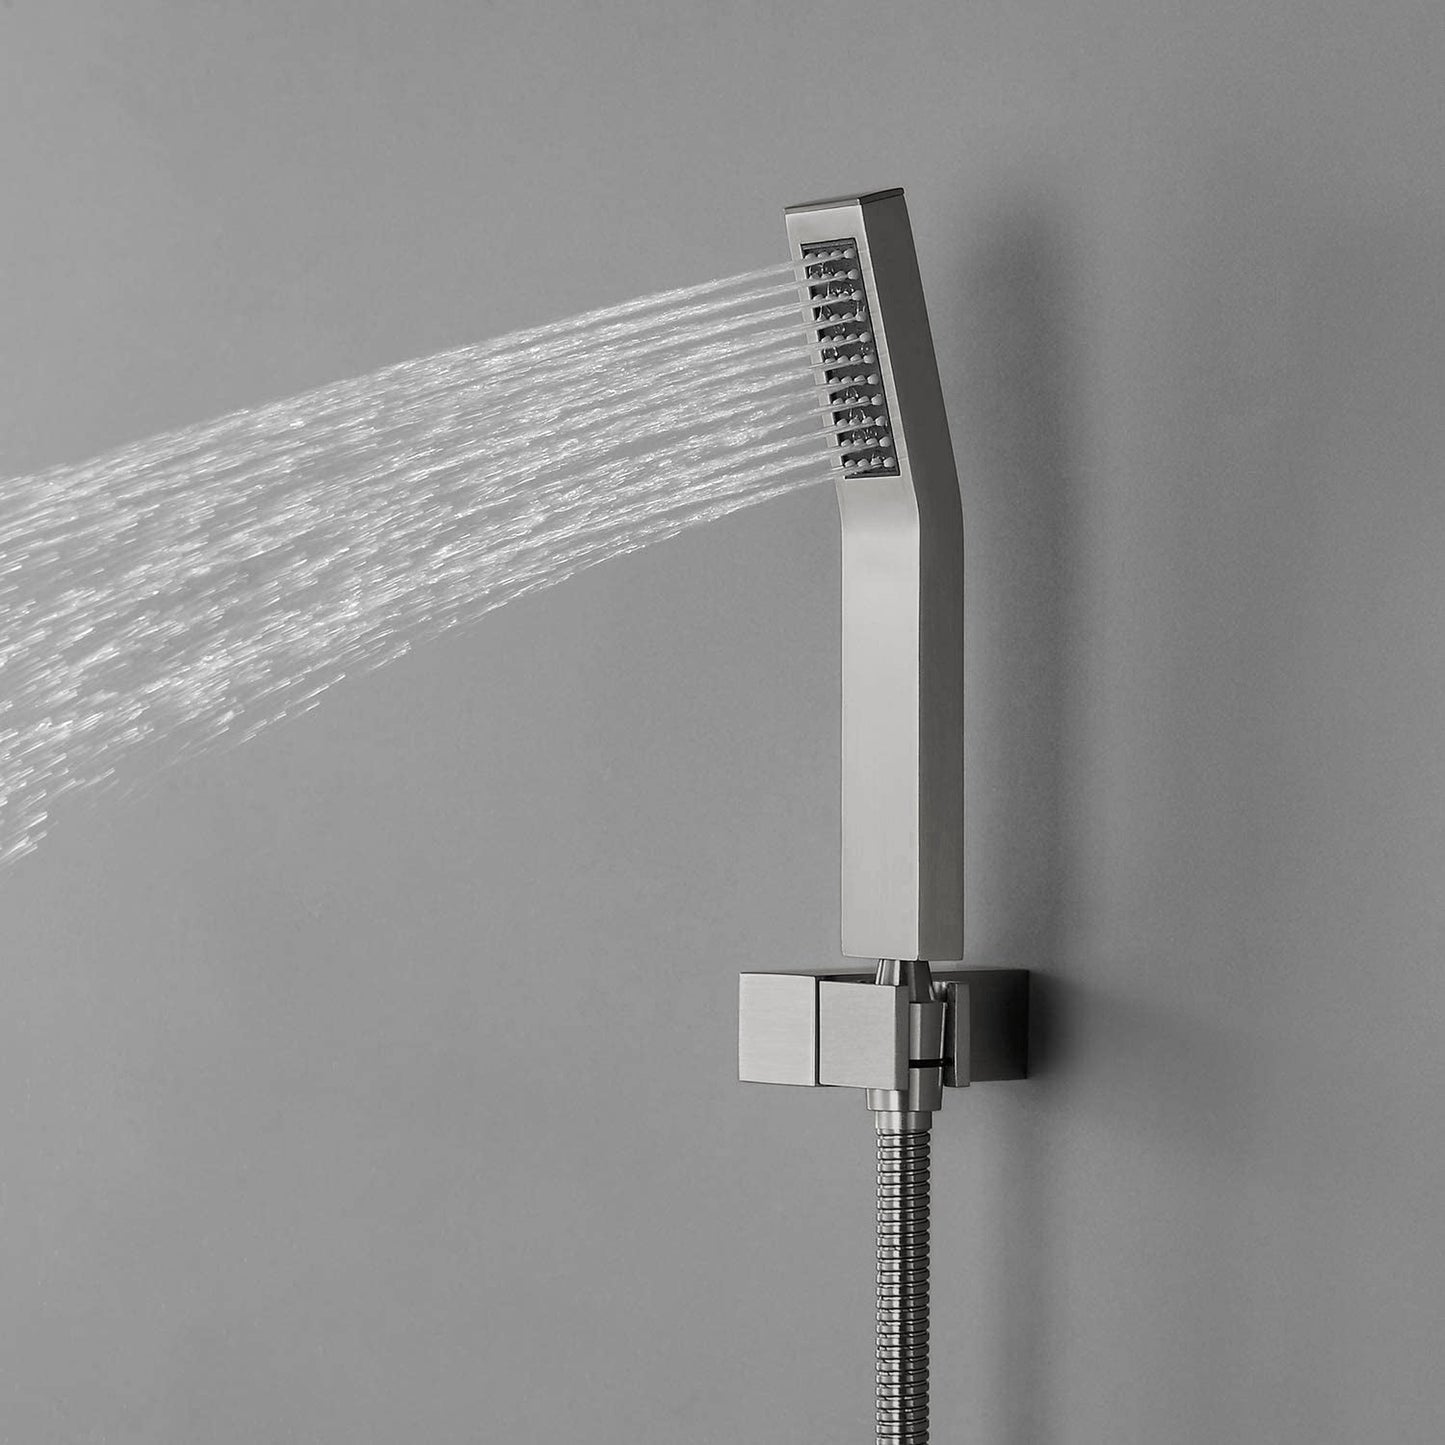 Fontana 8" Chrome Square Ceiling Mounted Thermostatic Rainfall Shower Set With 6-Jet Body Spray and Hand Showers